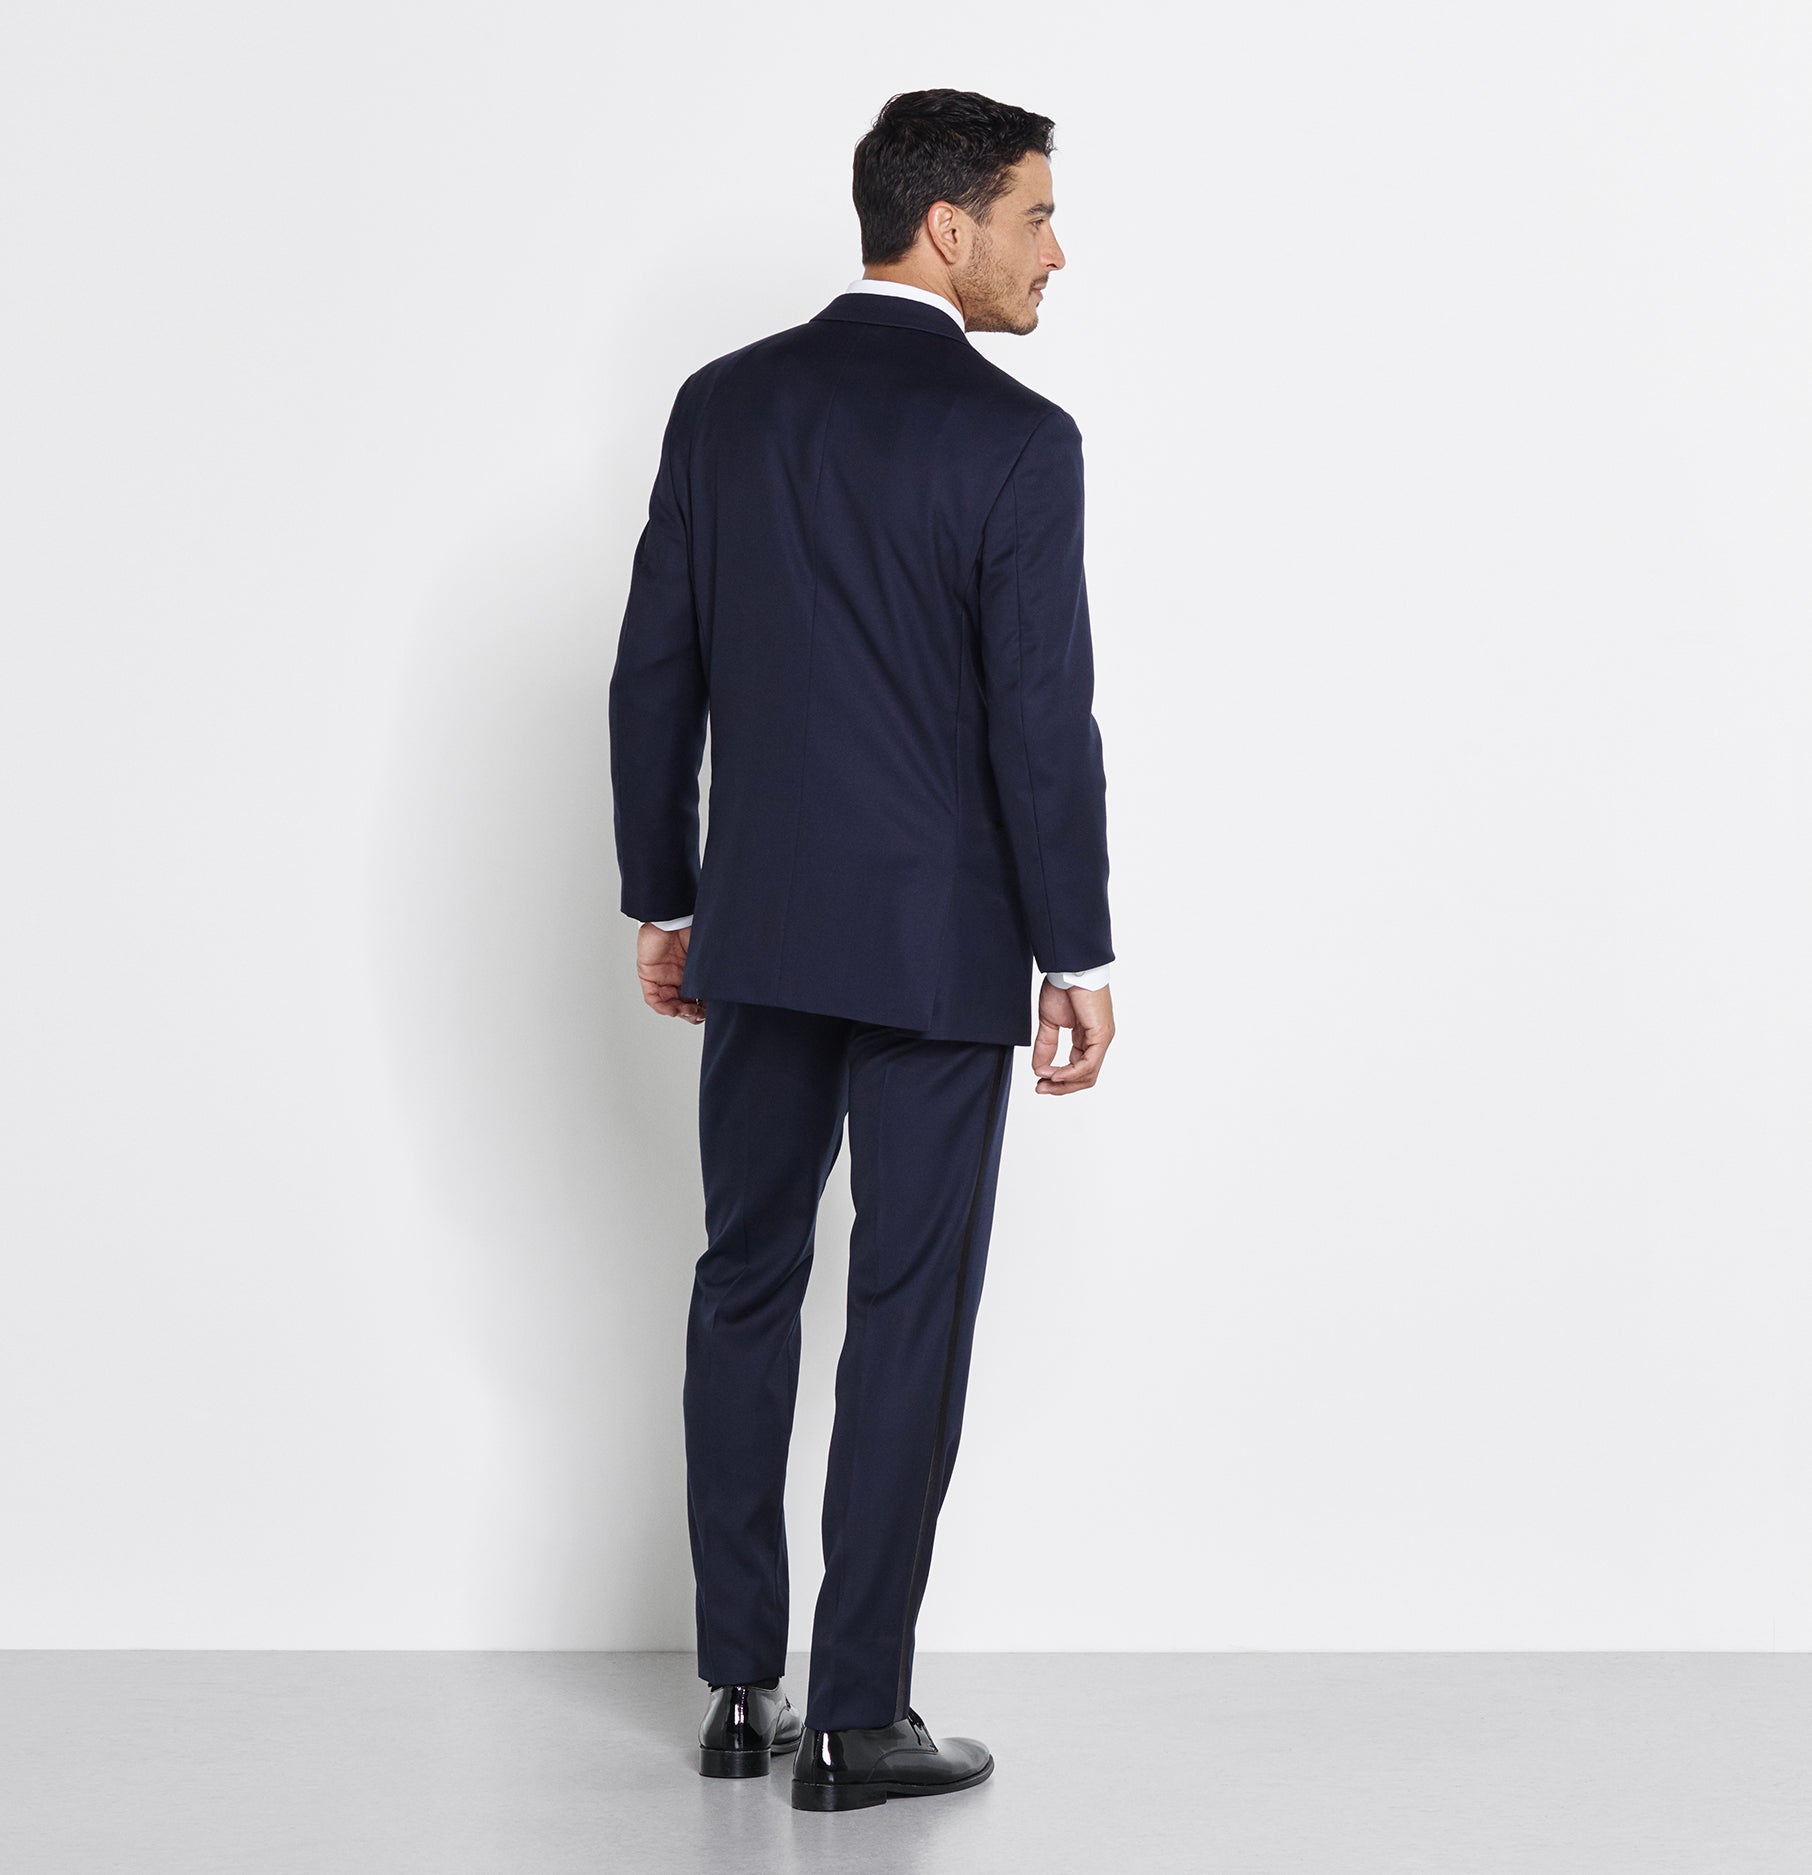 How to Wear a Royal  Midnight Blue Tuxedo  Suits Expert